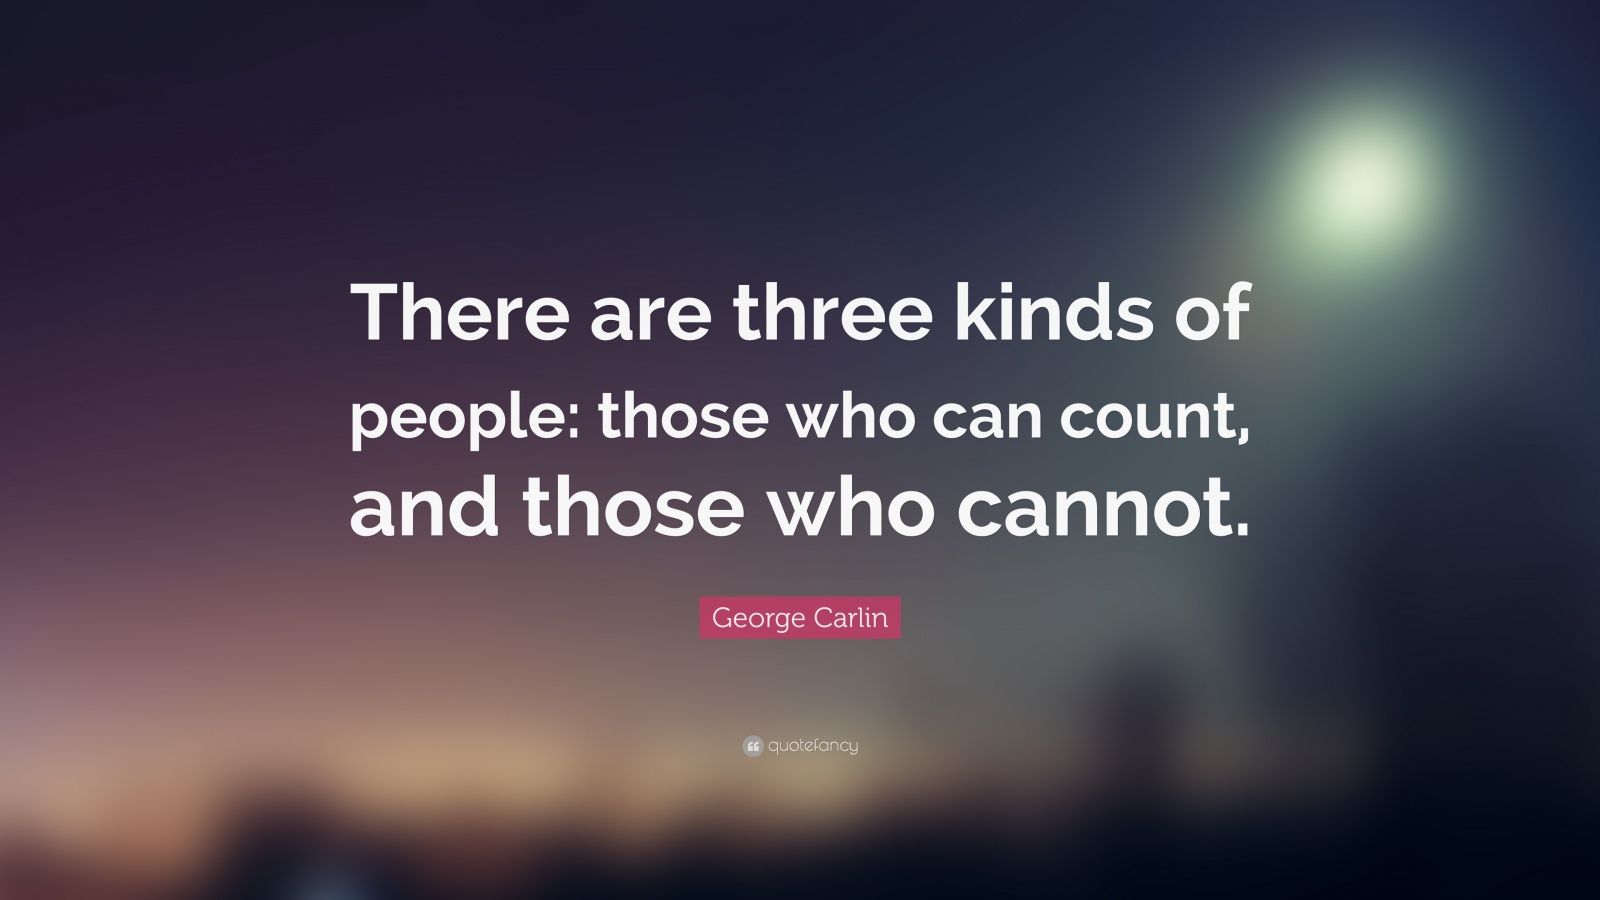 George Carlin Quote: “There are three kinds of people: those who can